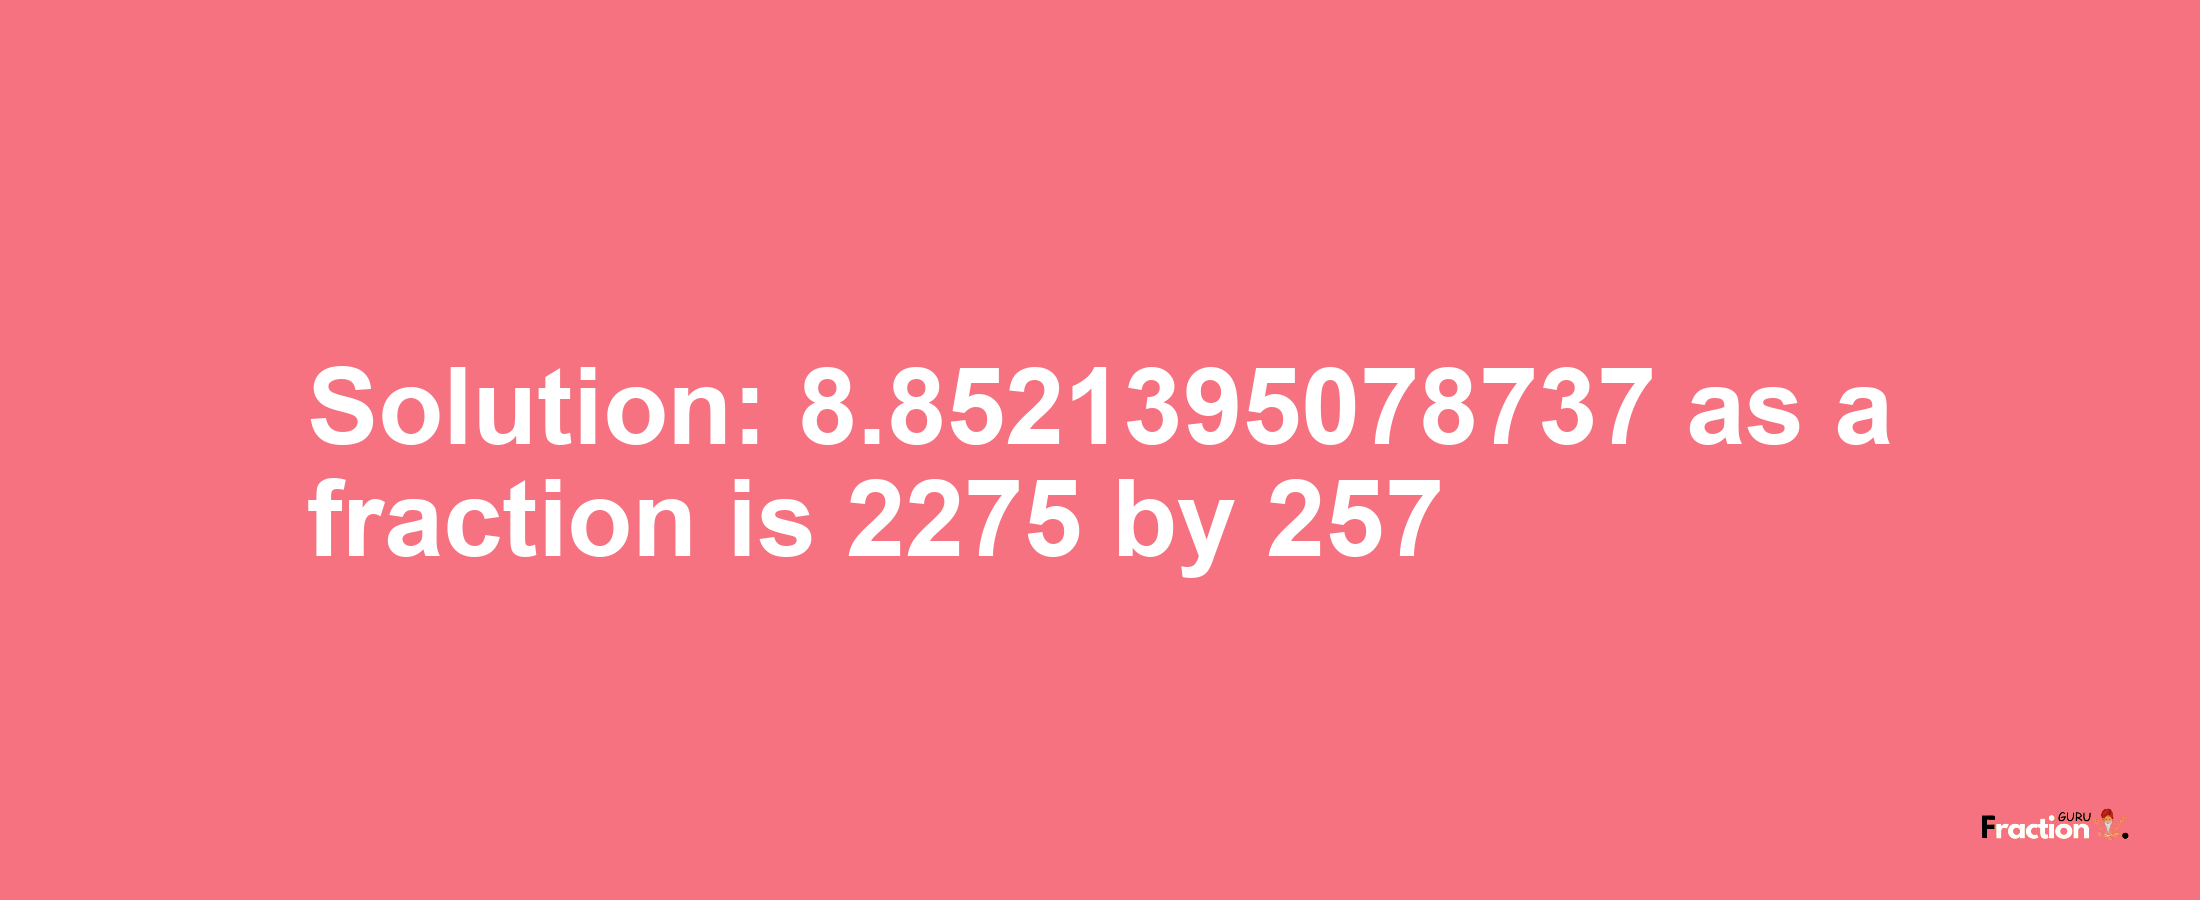 Solution:8.8521395078737 as a fraction is 2275/257